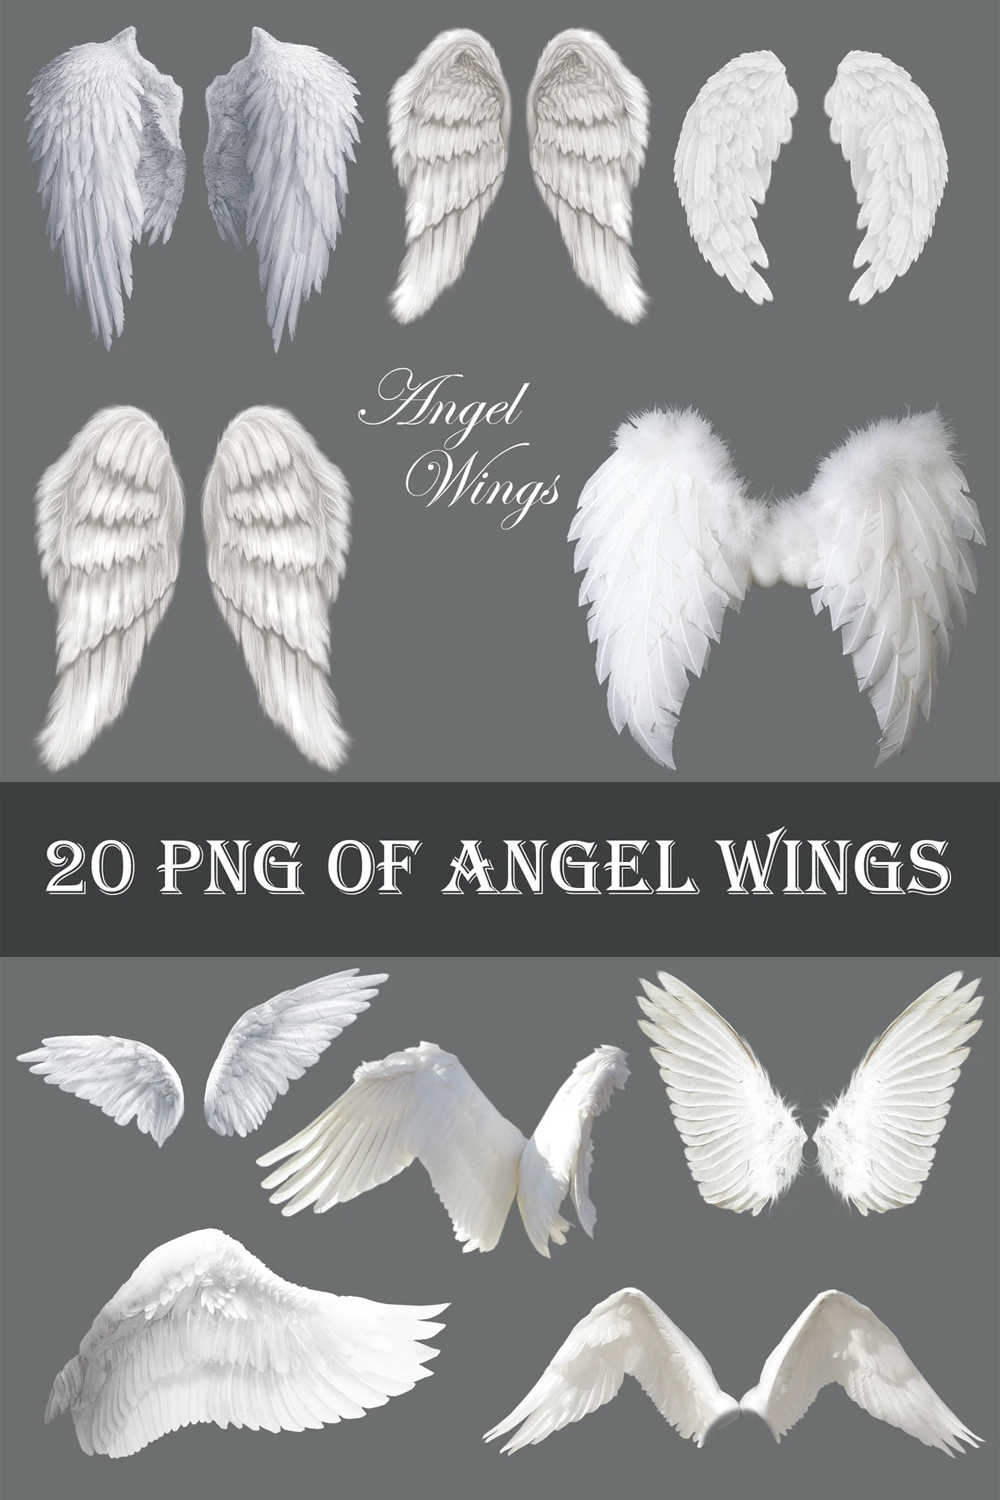 The preview of the wings is white.